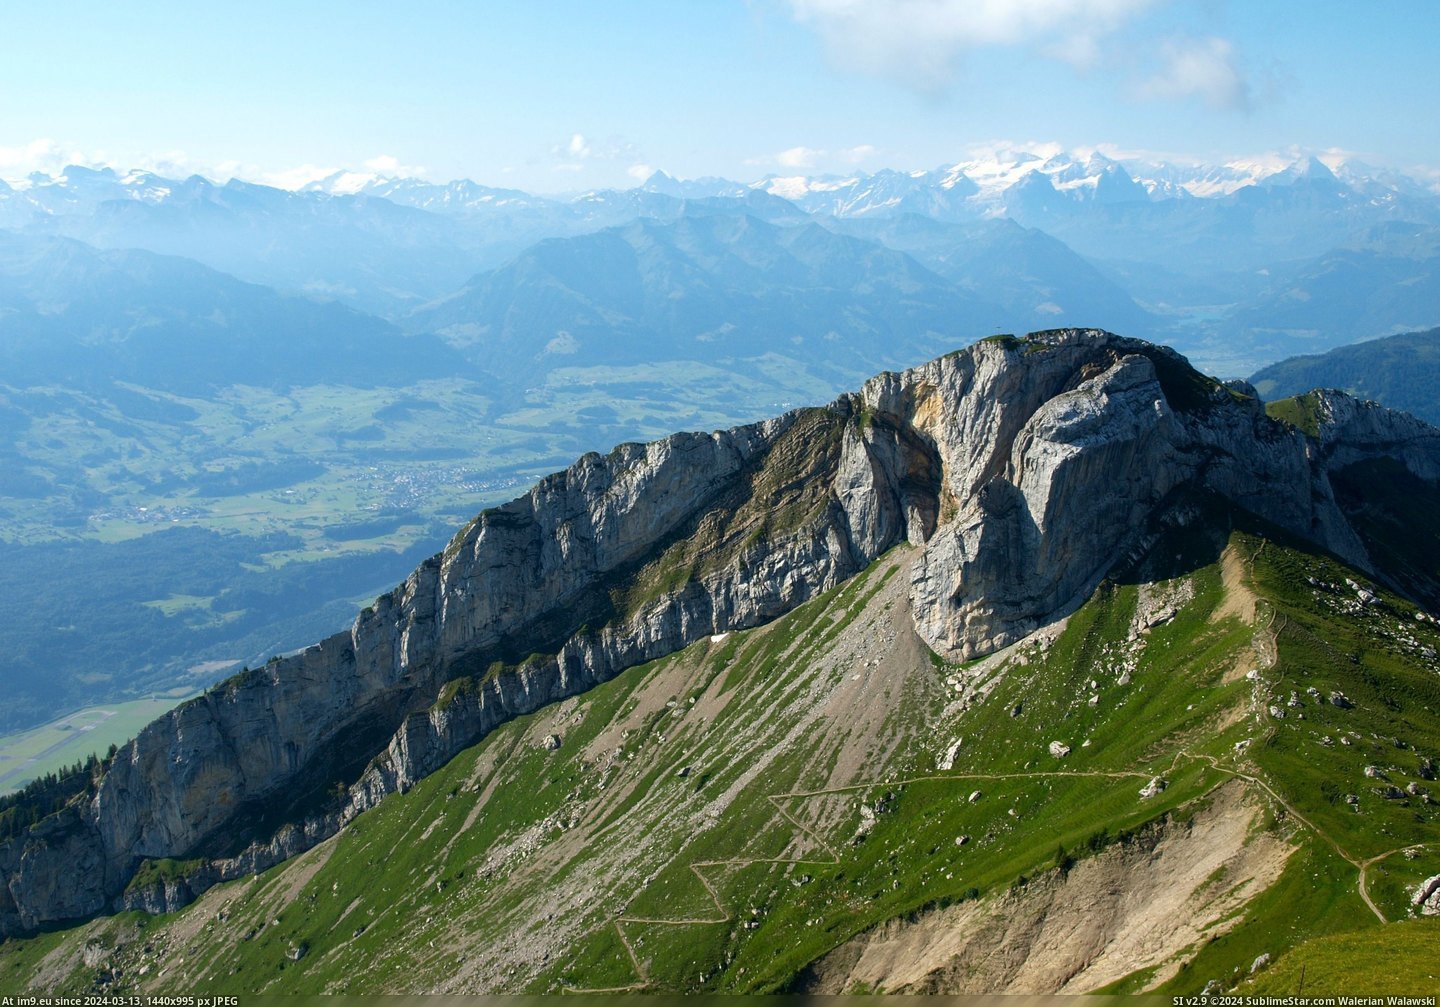 #Mount #Pilatus #Switzerland [Earthporn] View from Mount Pilatus, Switzerland [2997x2083] [OC] Pic. (Изображение из альбом My r/EARTHPORN favs))